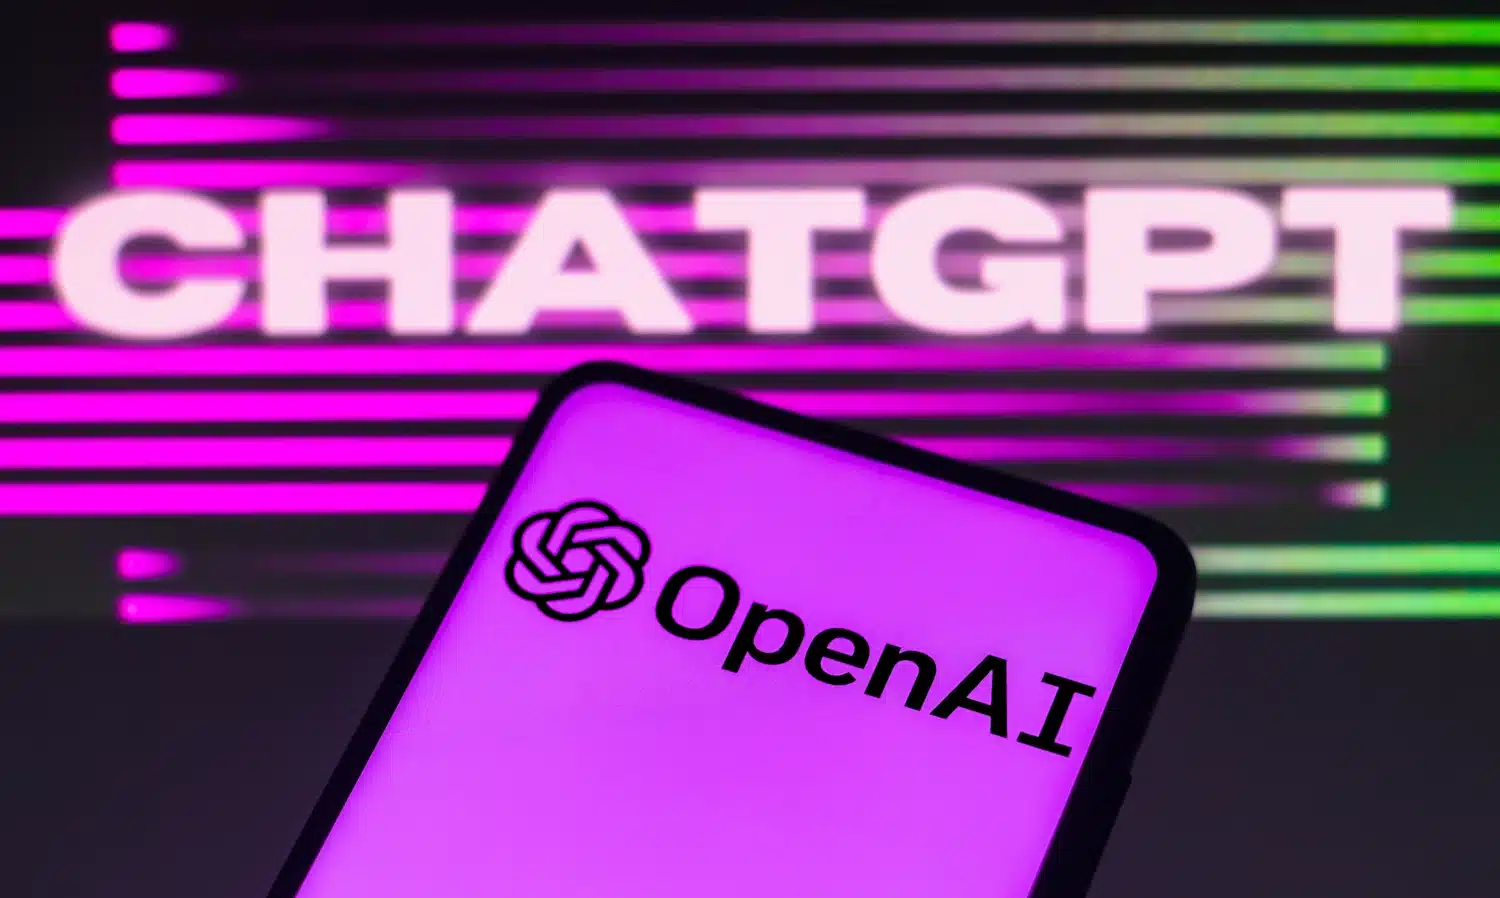 OpenAI is bringing some exciting new features to ChatGPT this week